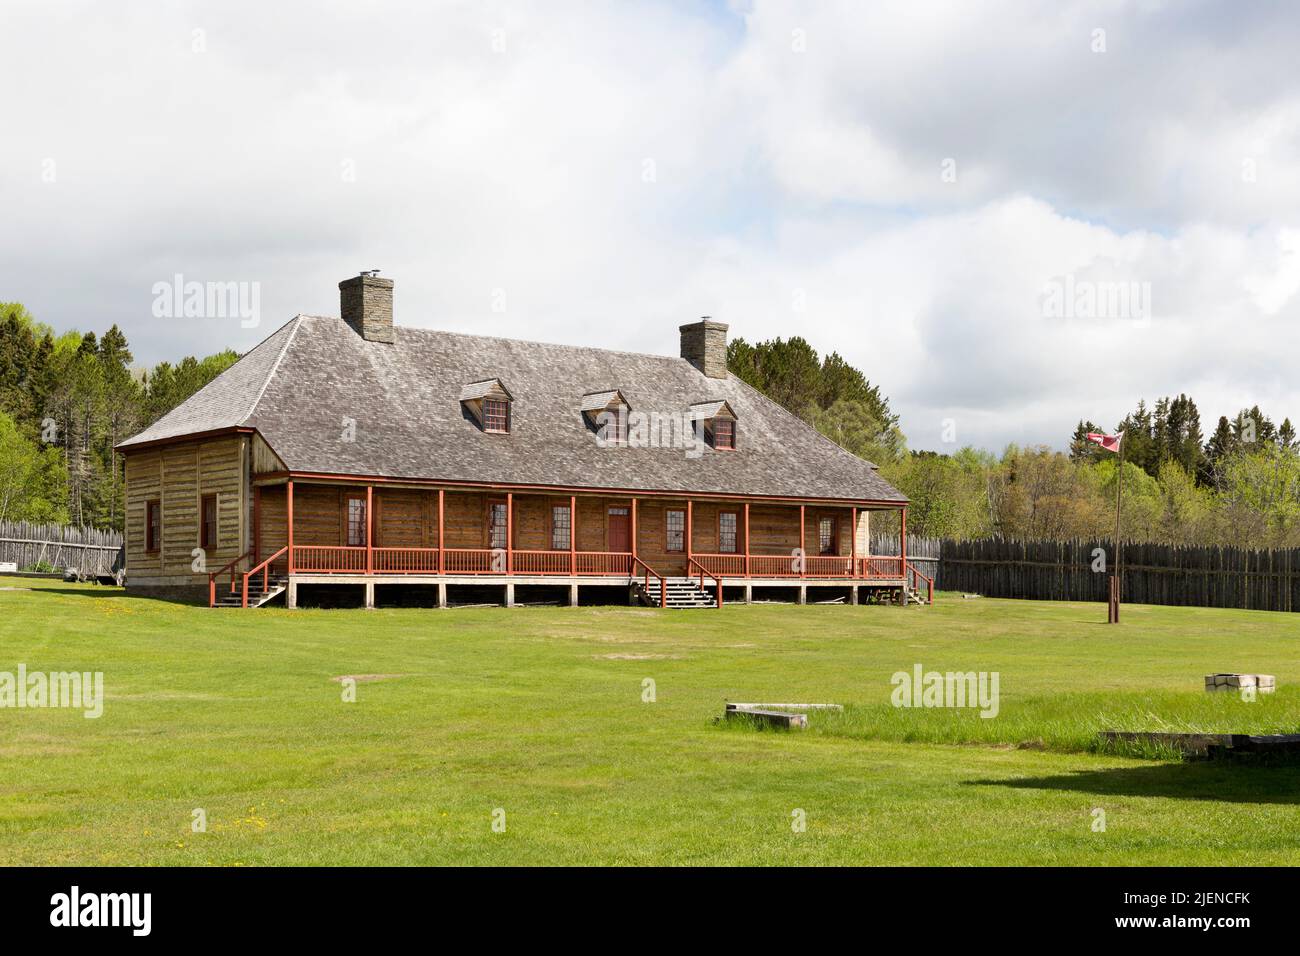 The reconstructed North West Company Grand Portage National Monument fur trading depot and Great Hall along the North Shore of Lake Superior Stock Photo